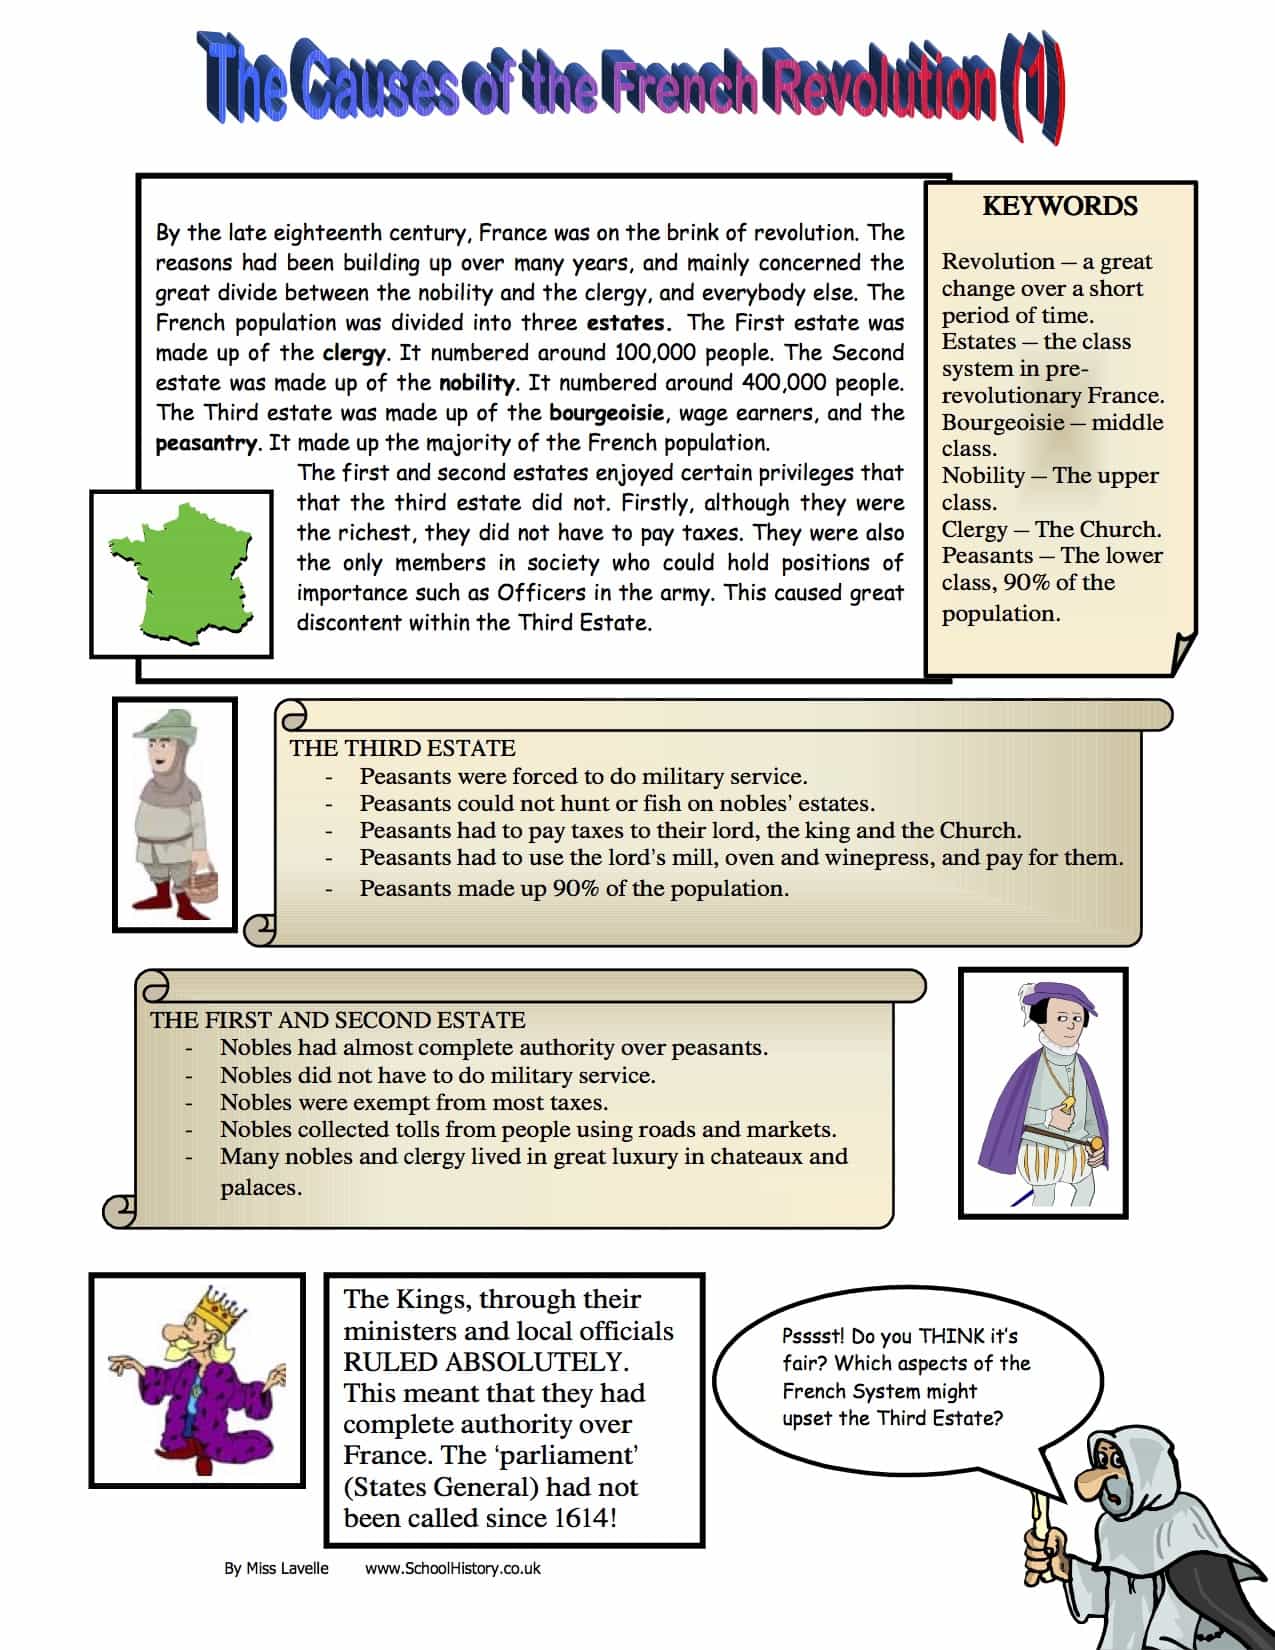 causes-of-the-french-revolution-worksheet-free-pdf-download